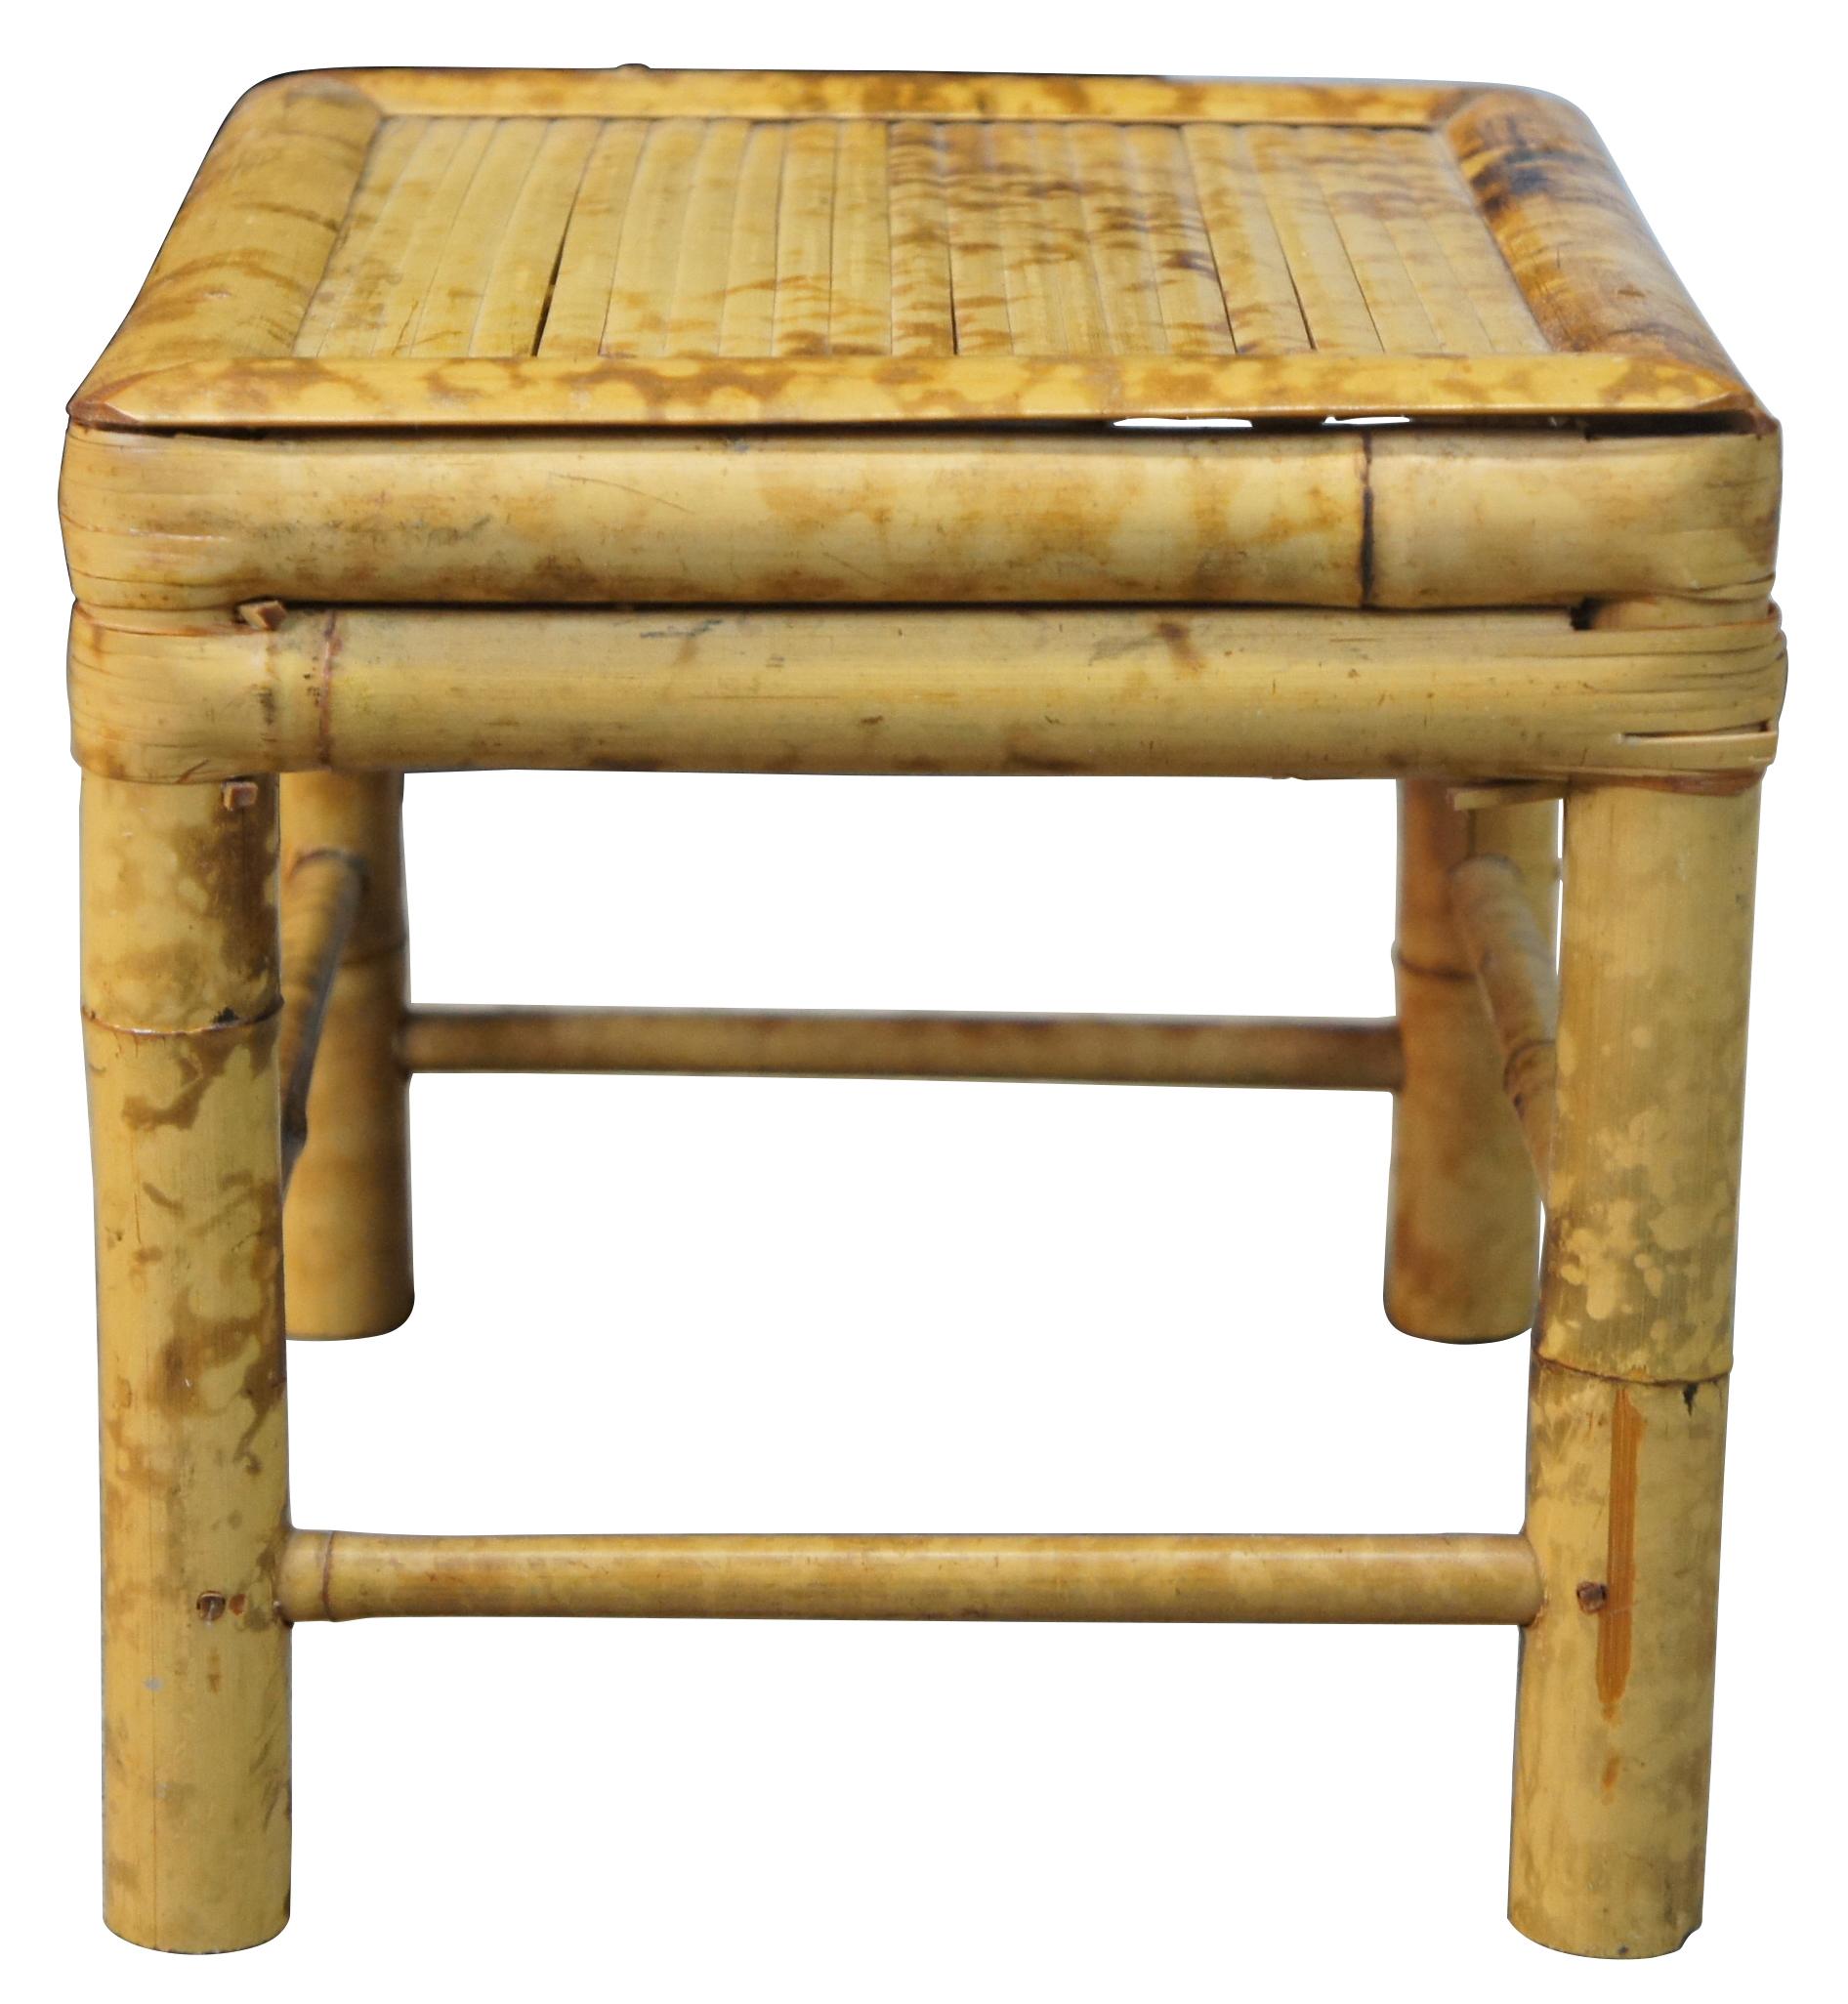 Chinoiserie Vintage Scorched Bamboo Plant Stand Table Rise Tortoise Bench Seat Stool